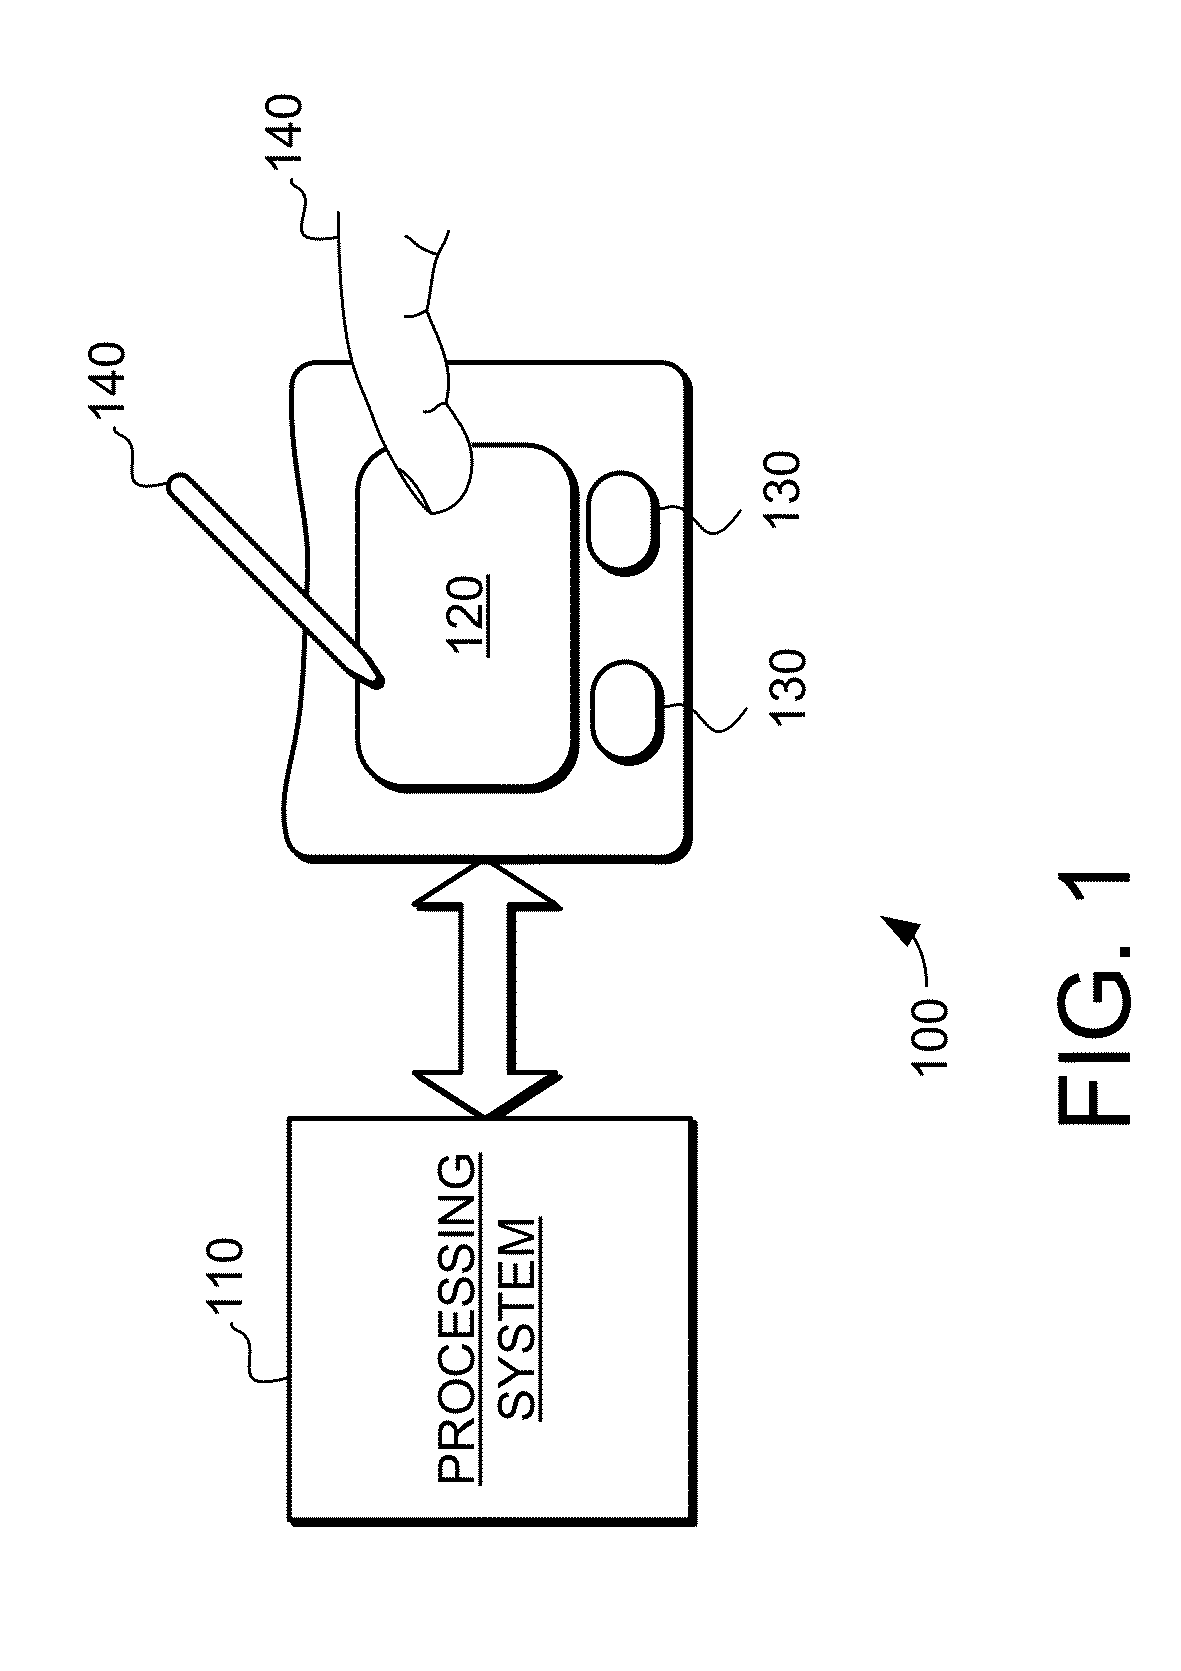 Systems and methods for reducing effects of interference in input devices